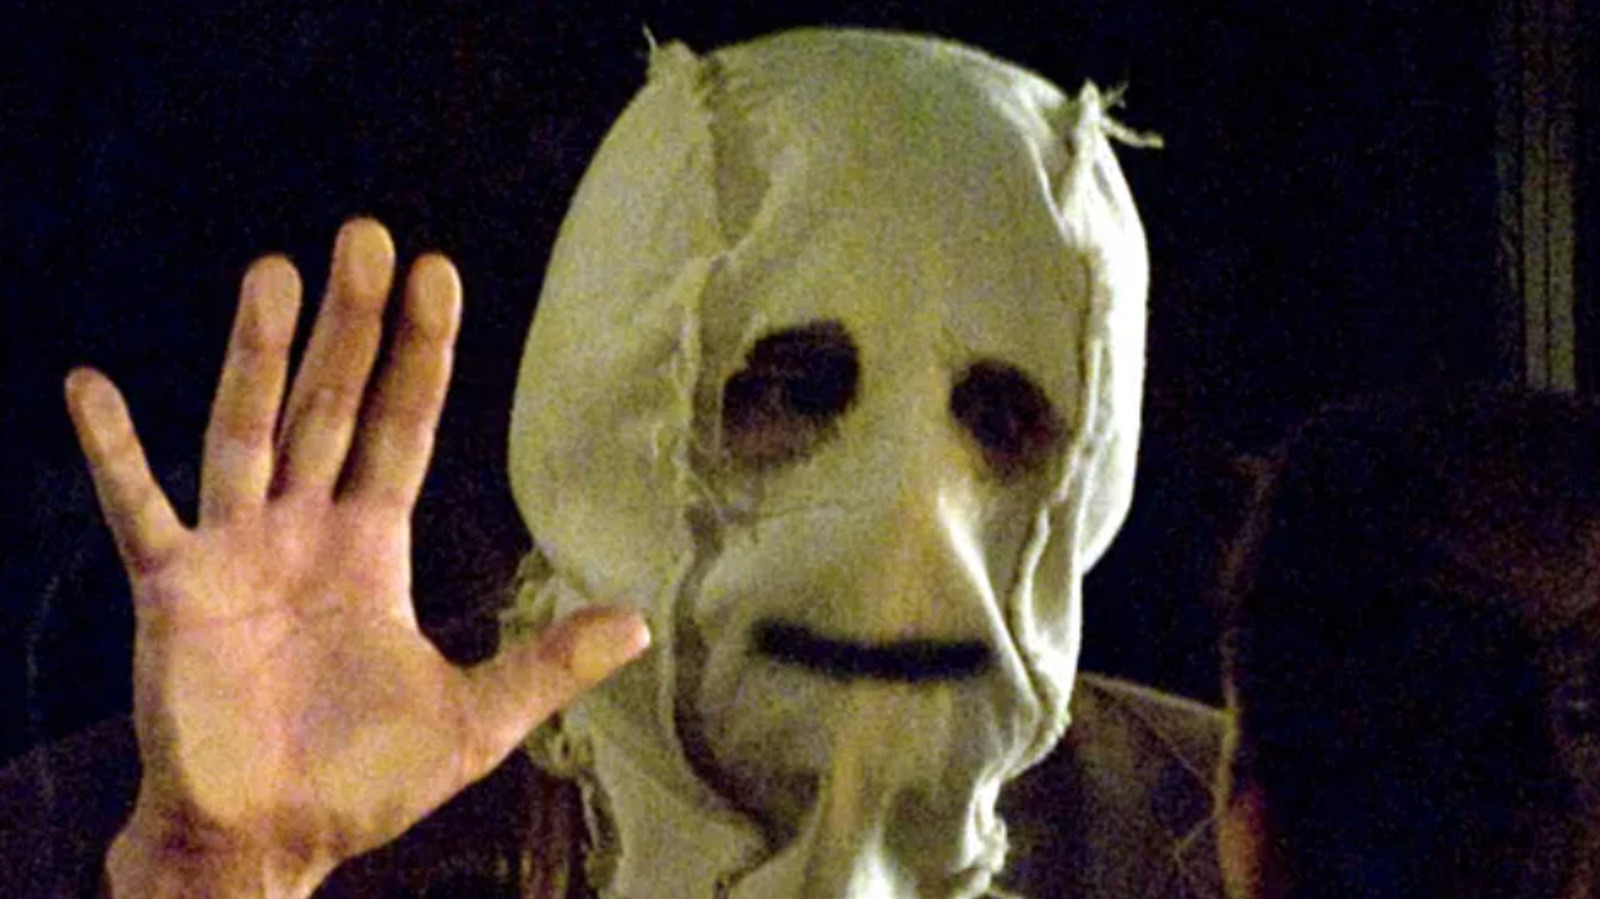 3 Disturbing Real-Life Stories That Inspired 'The Strangers' - iHorror